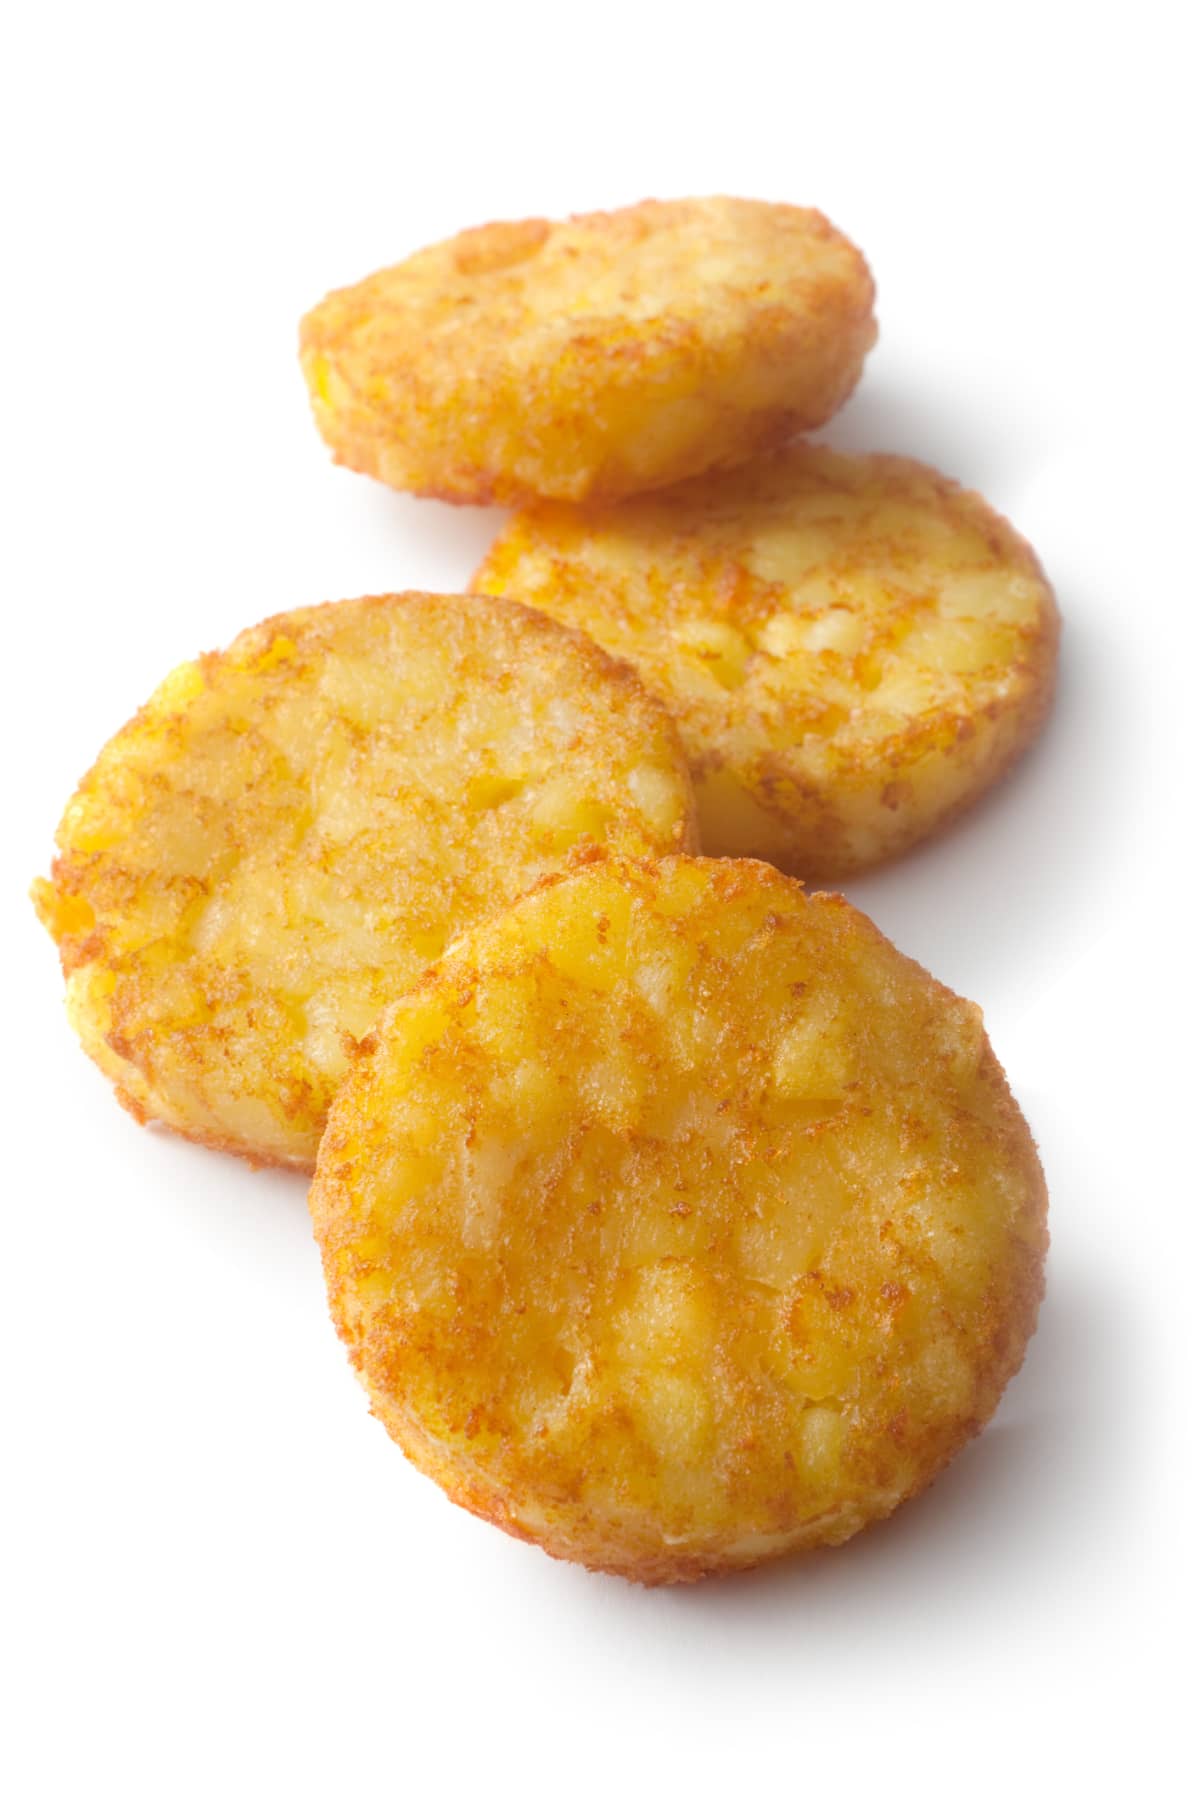 Four circular hash browns lined up on white background